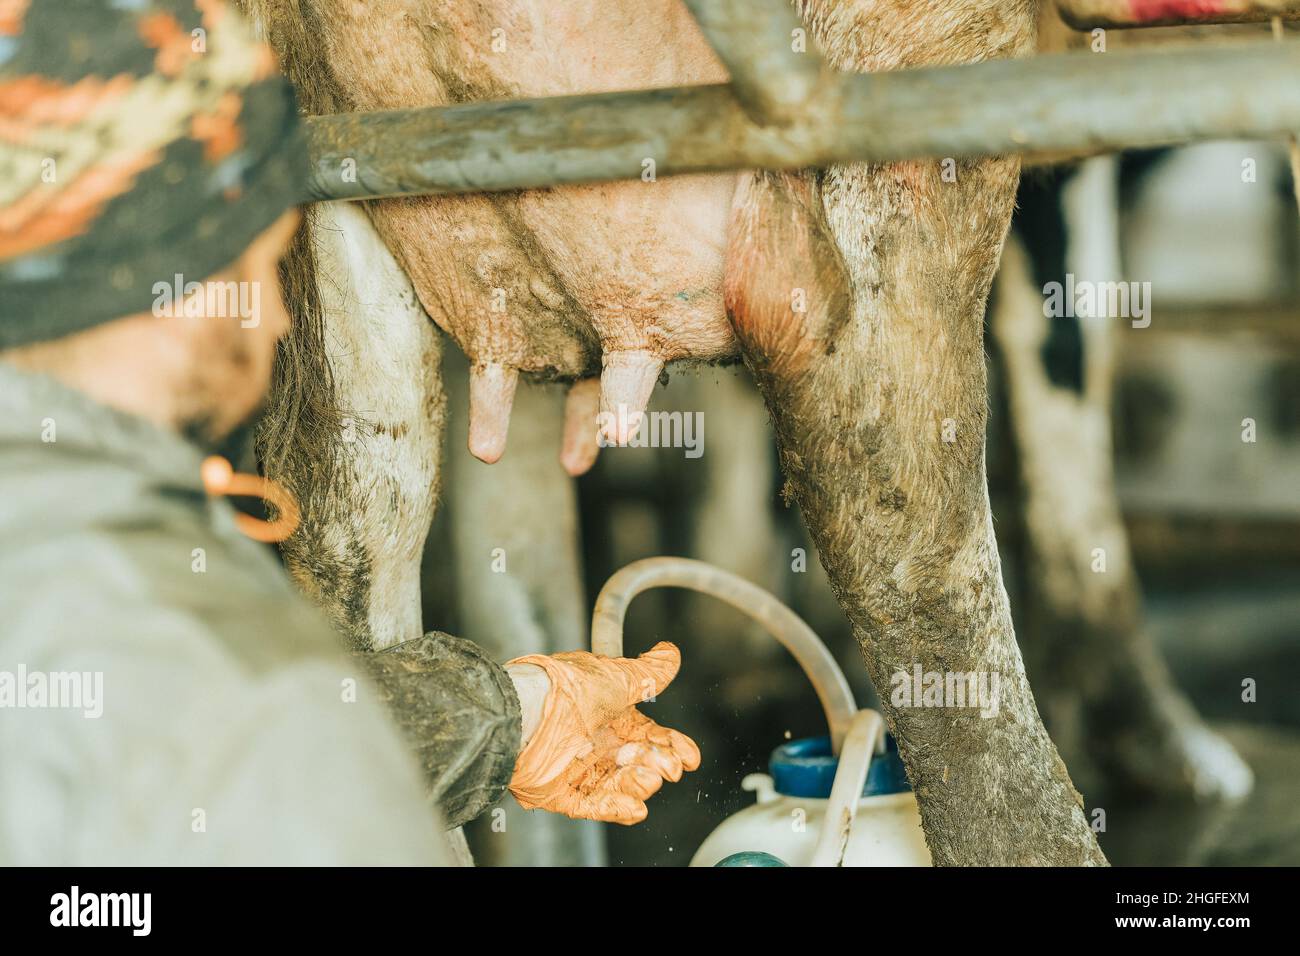 man removing teat cups after milking a cow Stock Photo